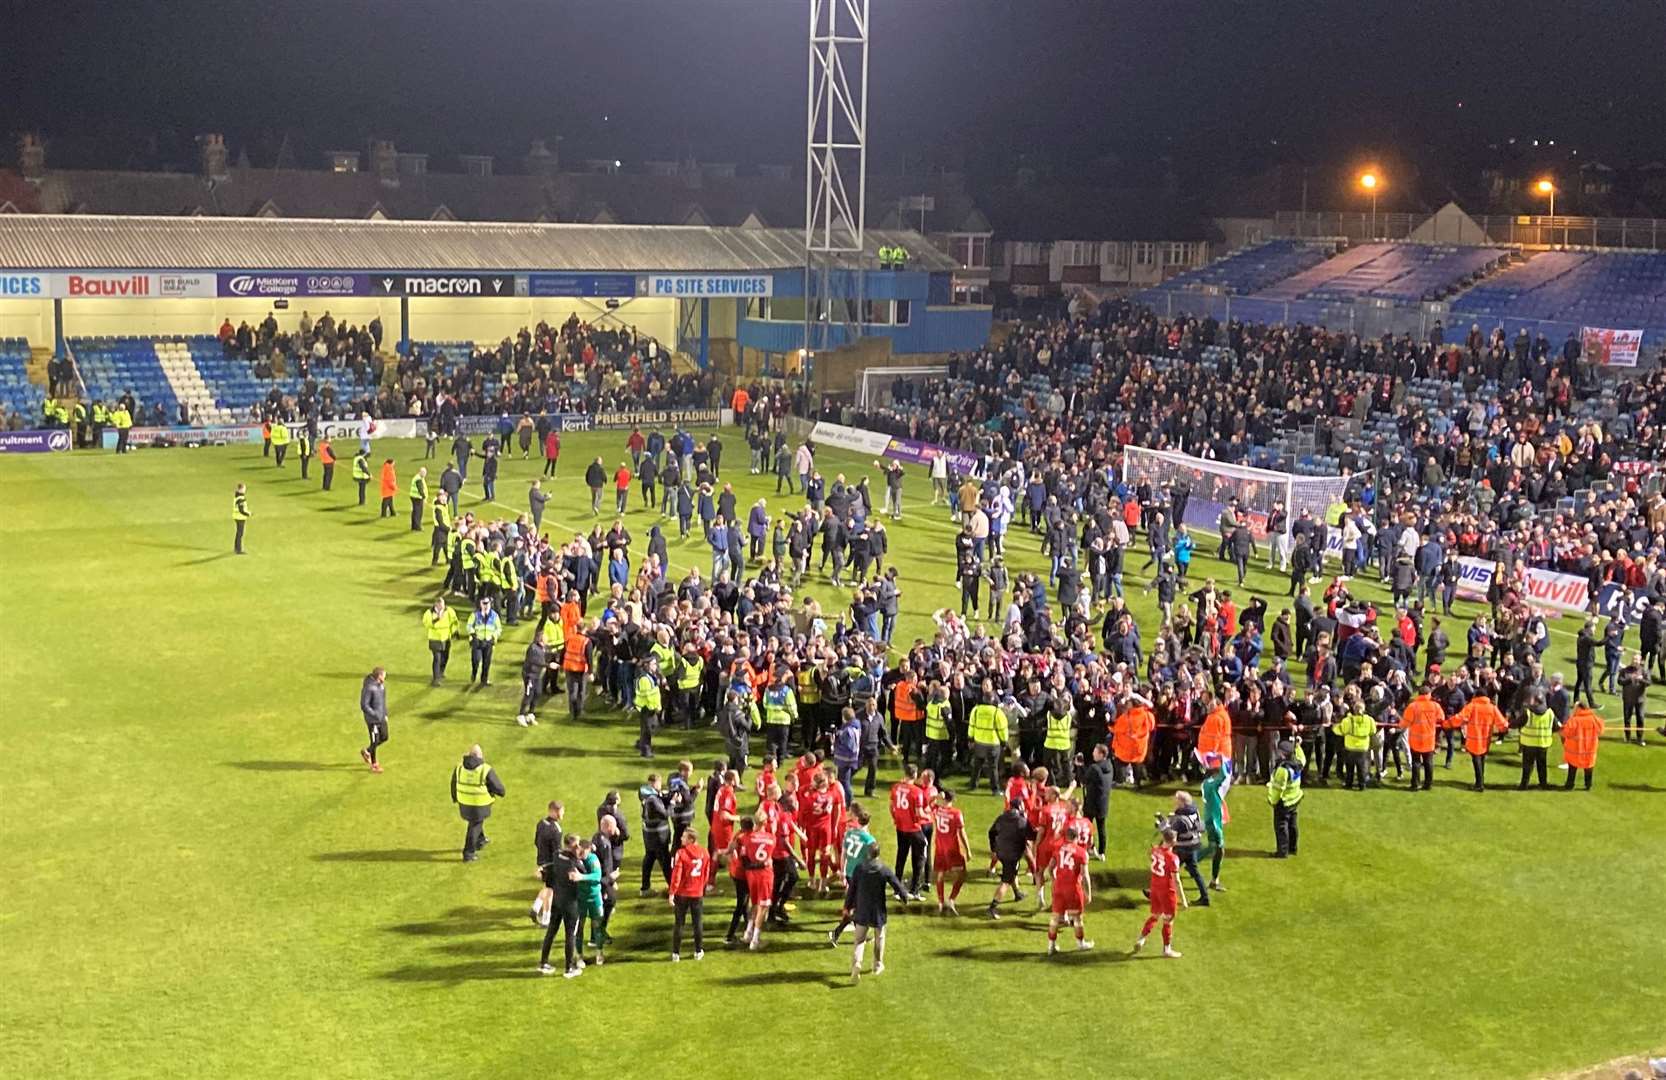 Leyton Orient fans invaded the pitch at the end of Tuesday night’s game